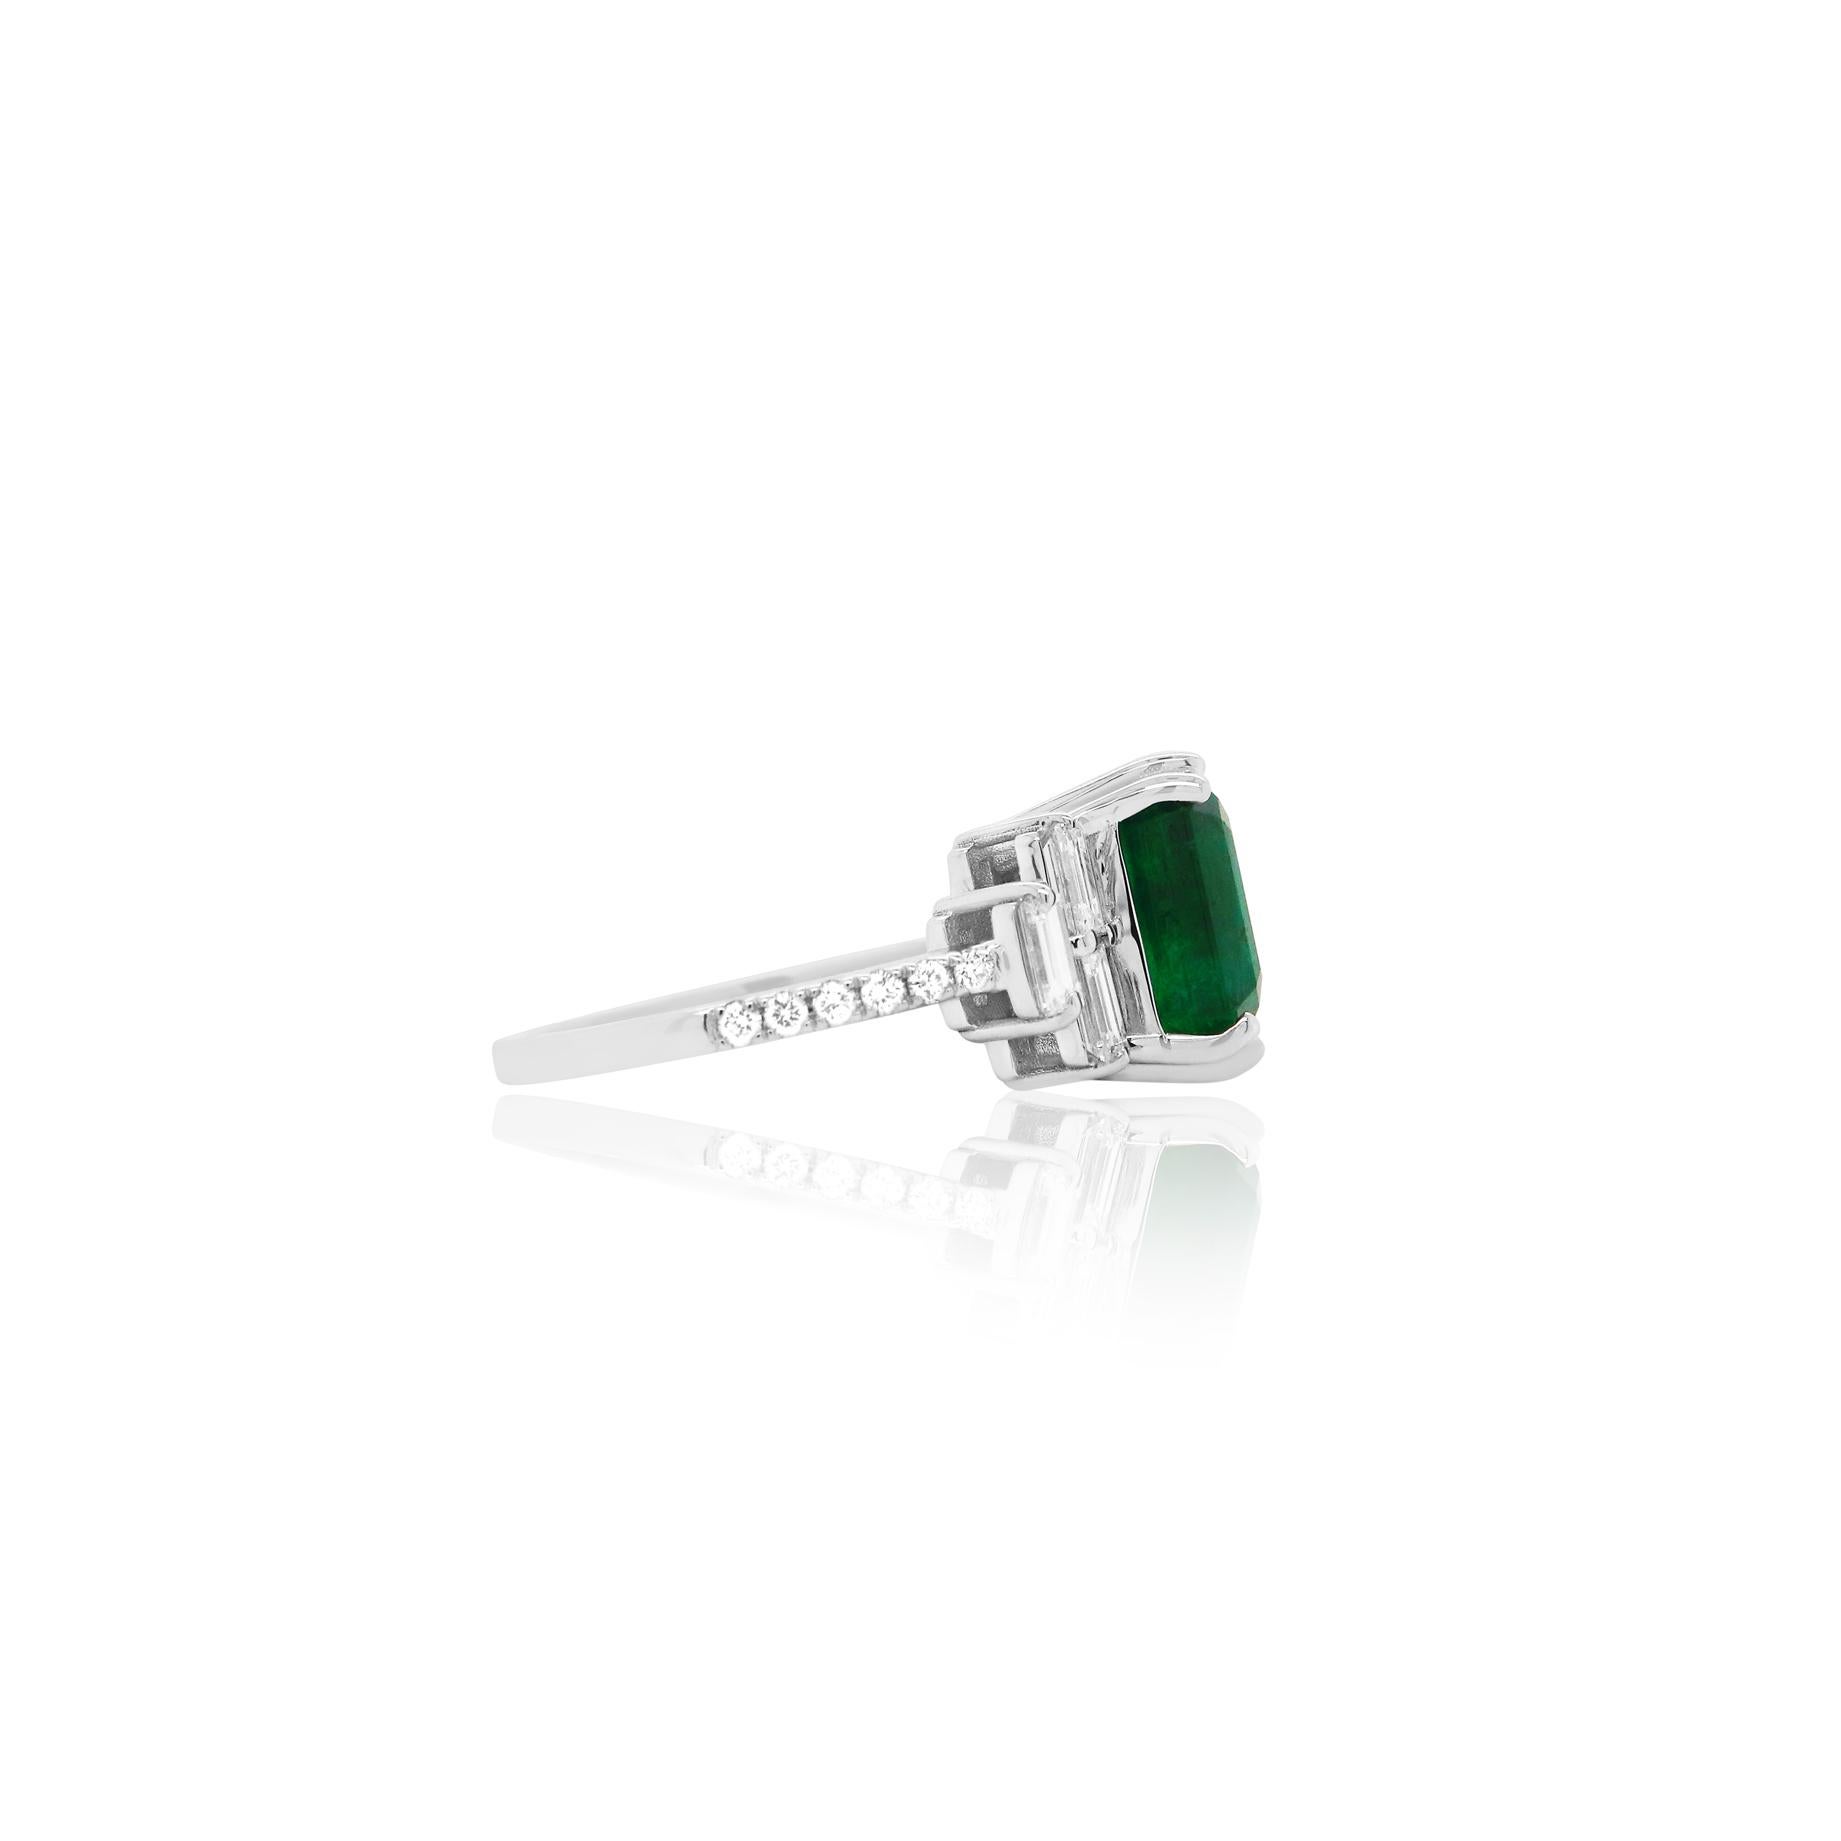 Contemporary Emerald Cut Emerald White Round and Baguette Diamond Ring 18K White Gold